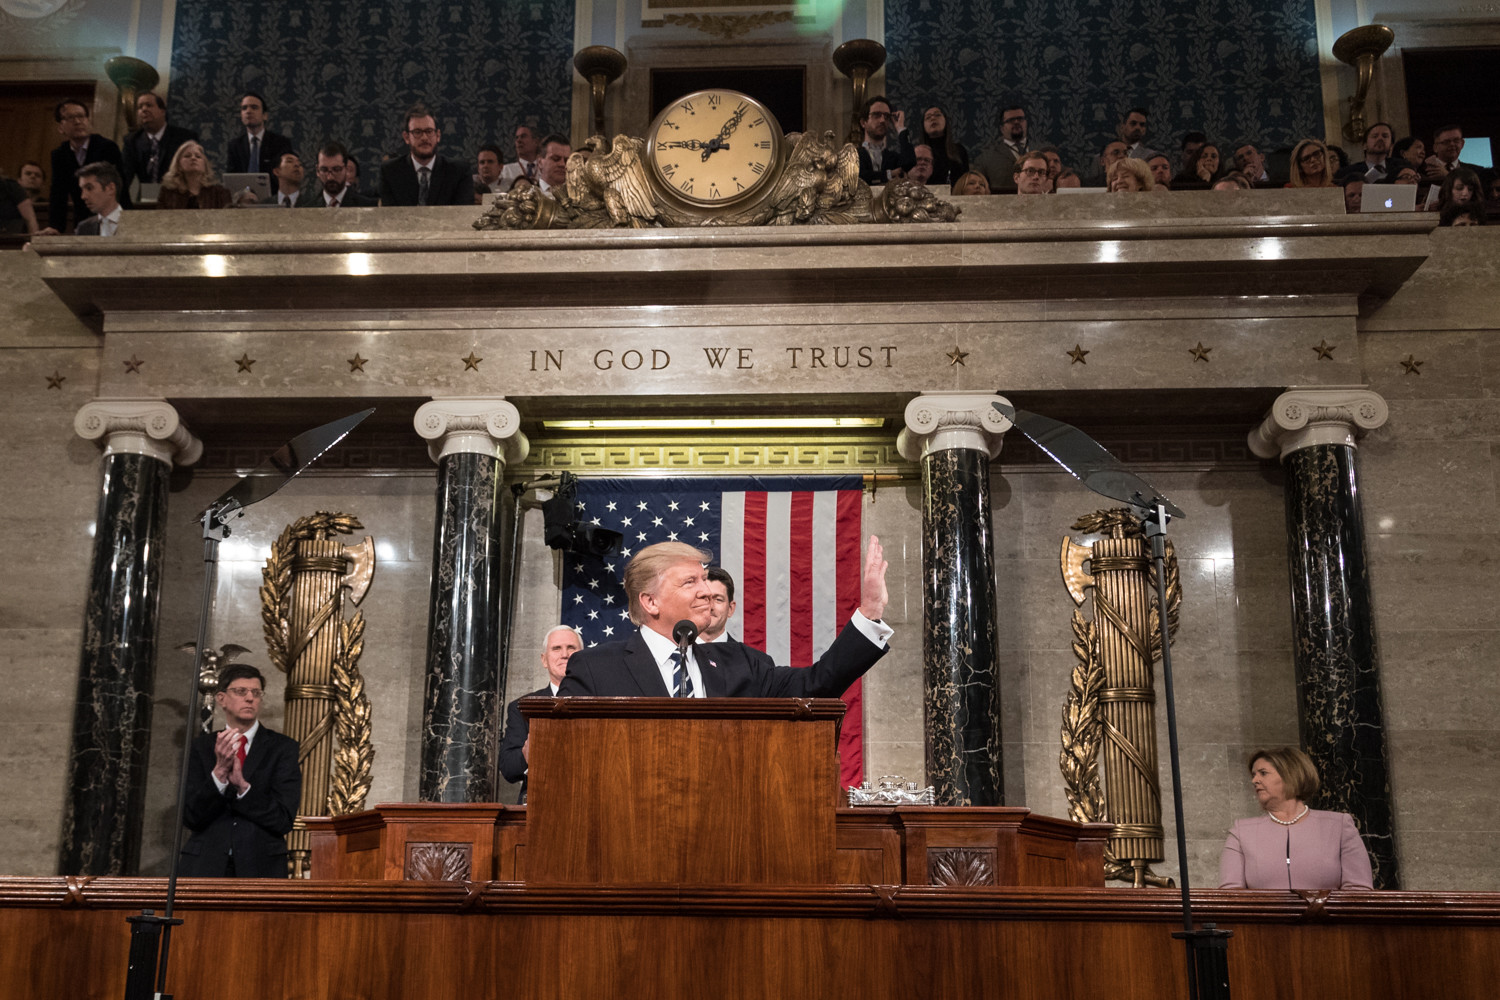 President Donald Trump delivers the Address to Congress on Tuesday, February 28, 2017, at the U.S. Capitol.  This is the President's first Address to Congress of his presidency.